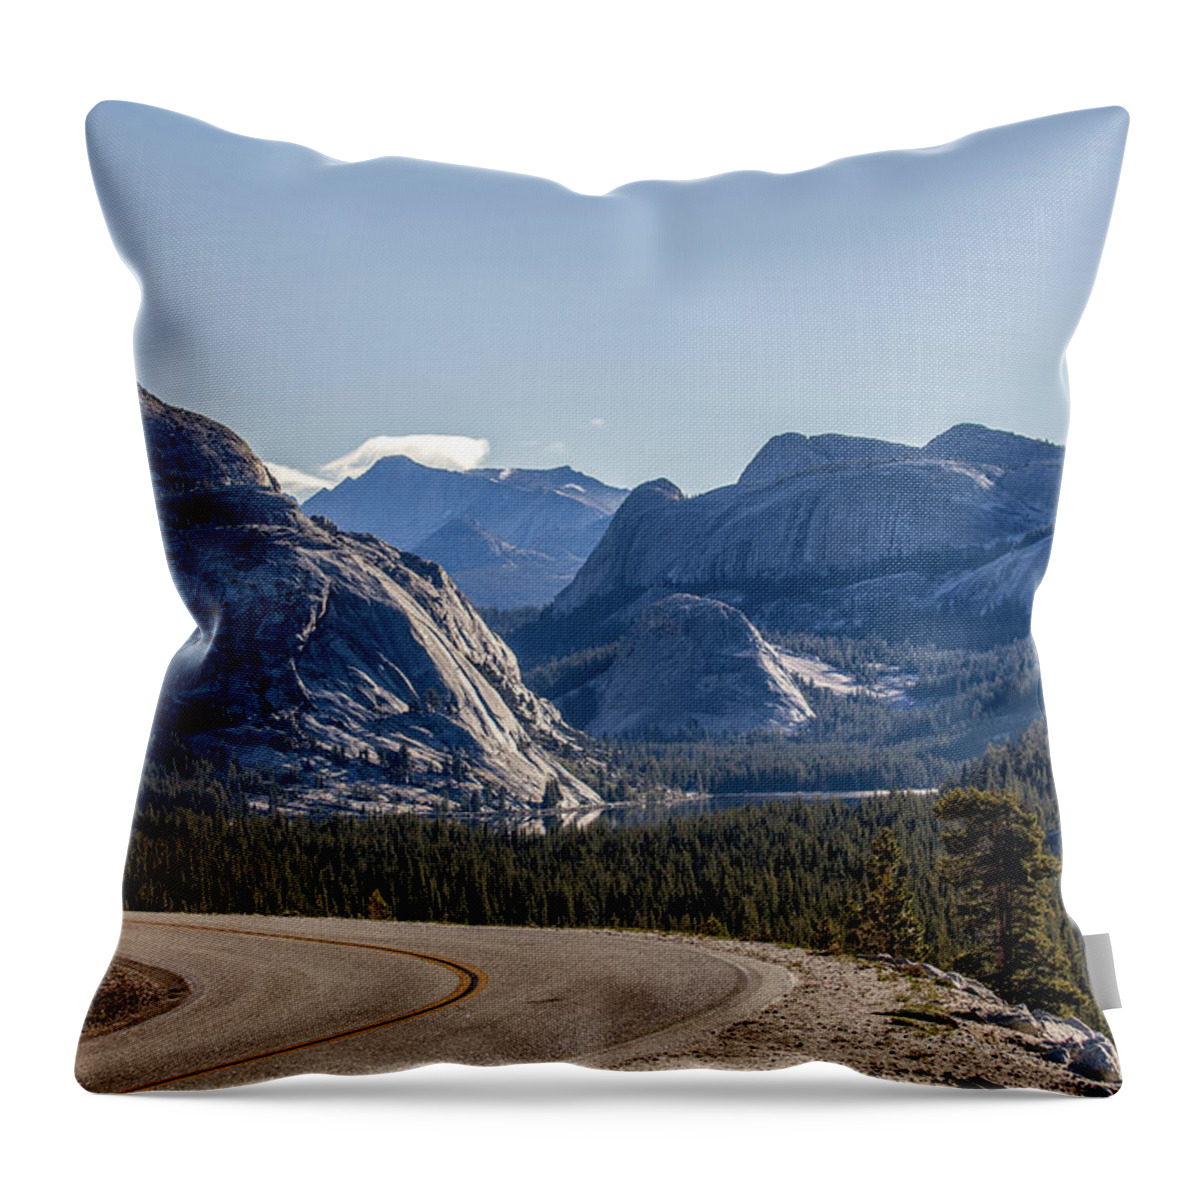 Yosemite Throw Pillow featuring the photograph A Road To Follow by Everet Regal